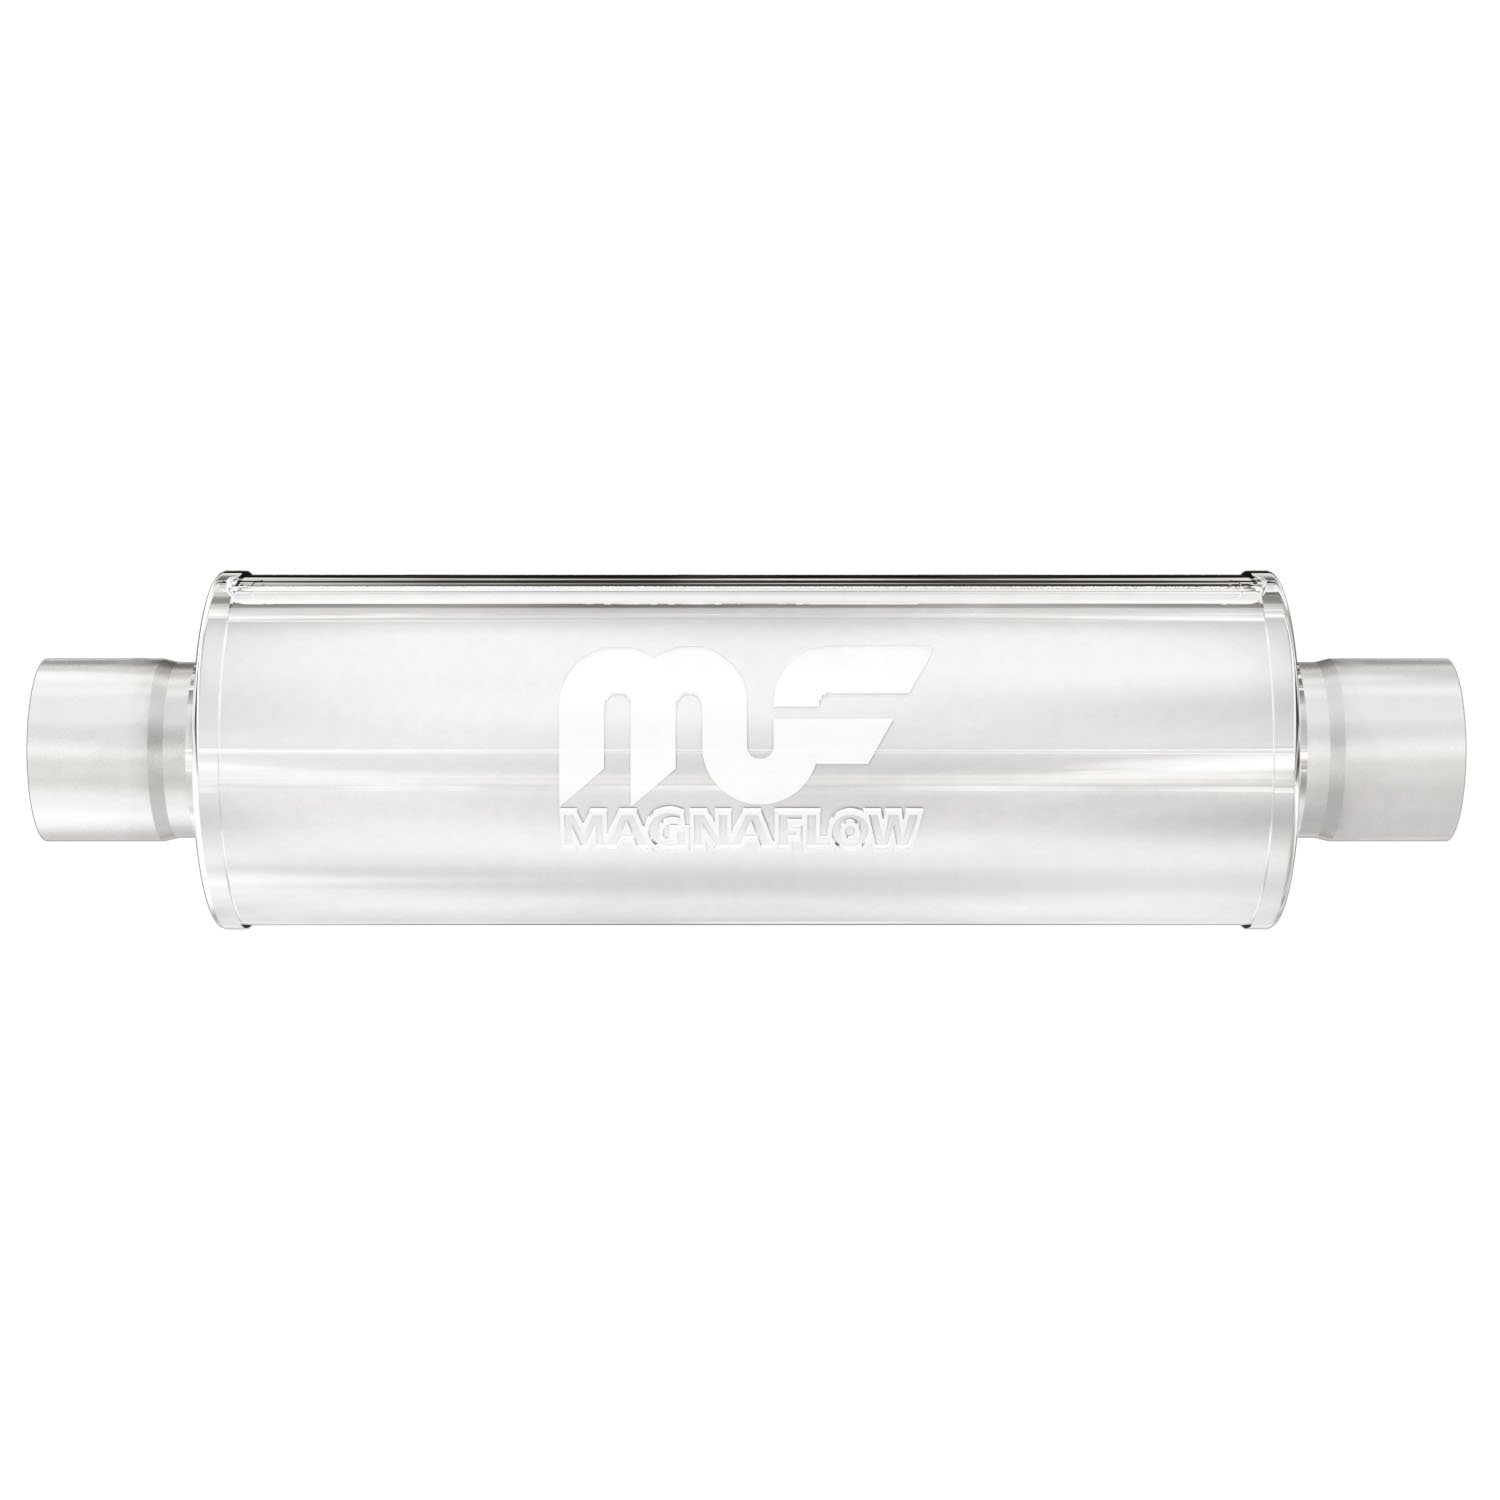 7" Round Muffler Center In/Center Out: 3" Body Length: 14" Overall Length: 20" Core Size: 3" Polished Finish